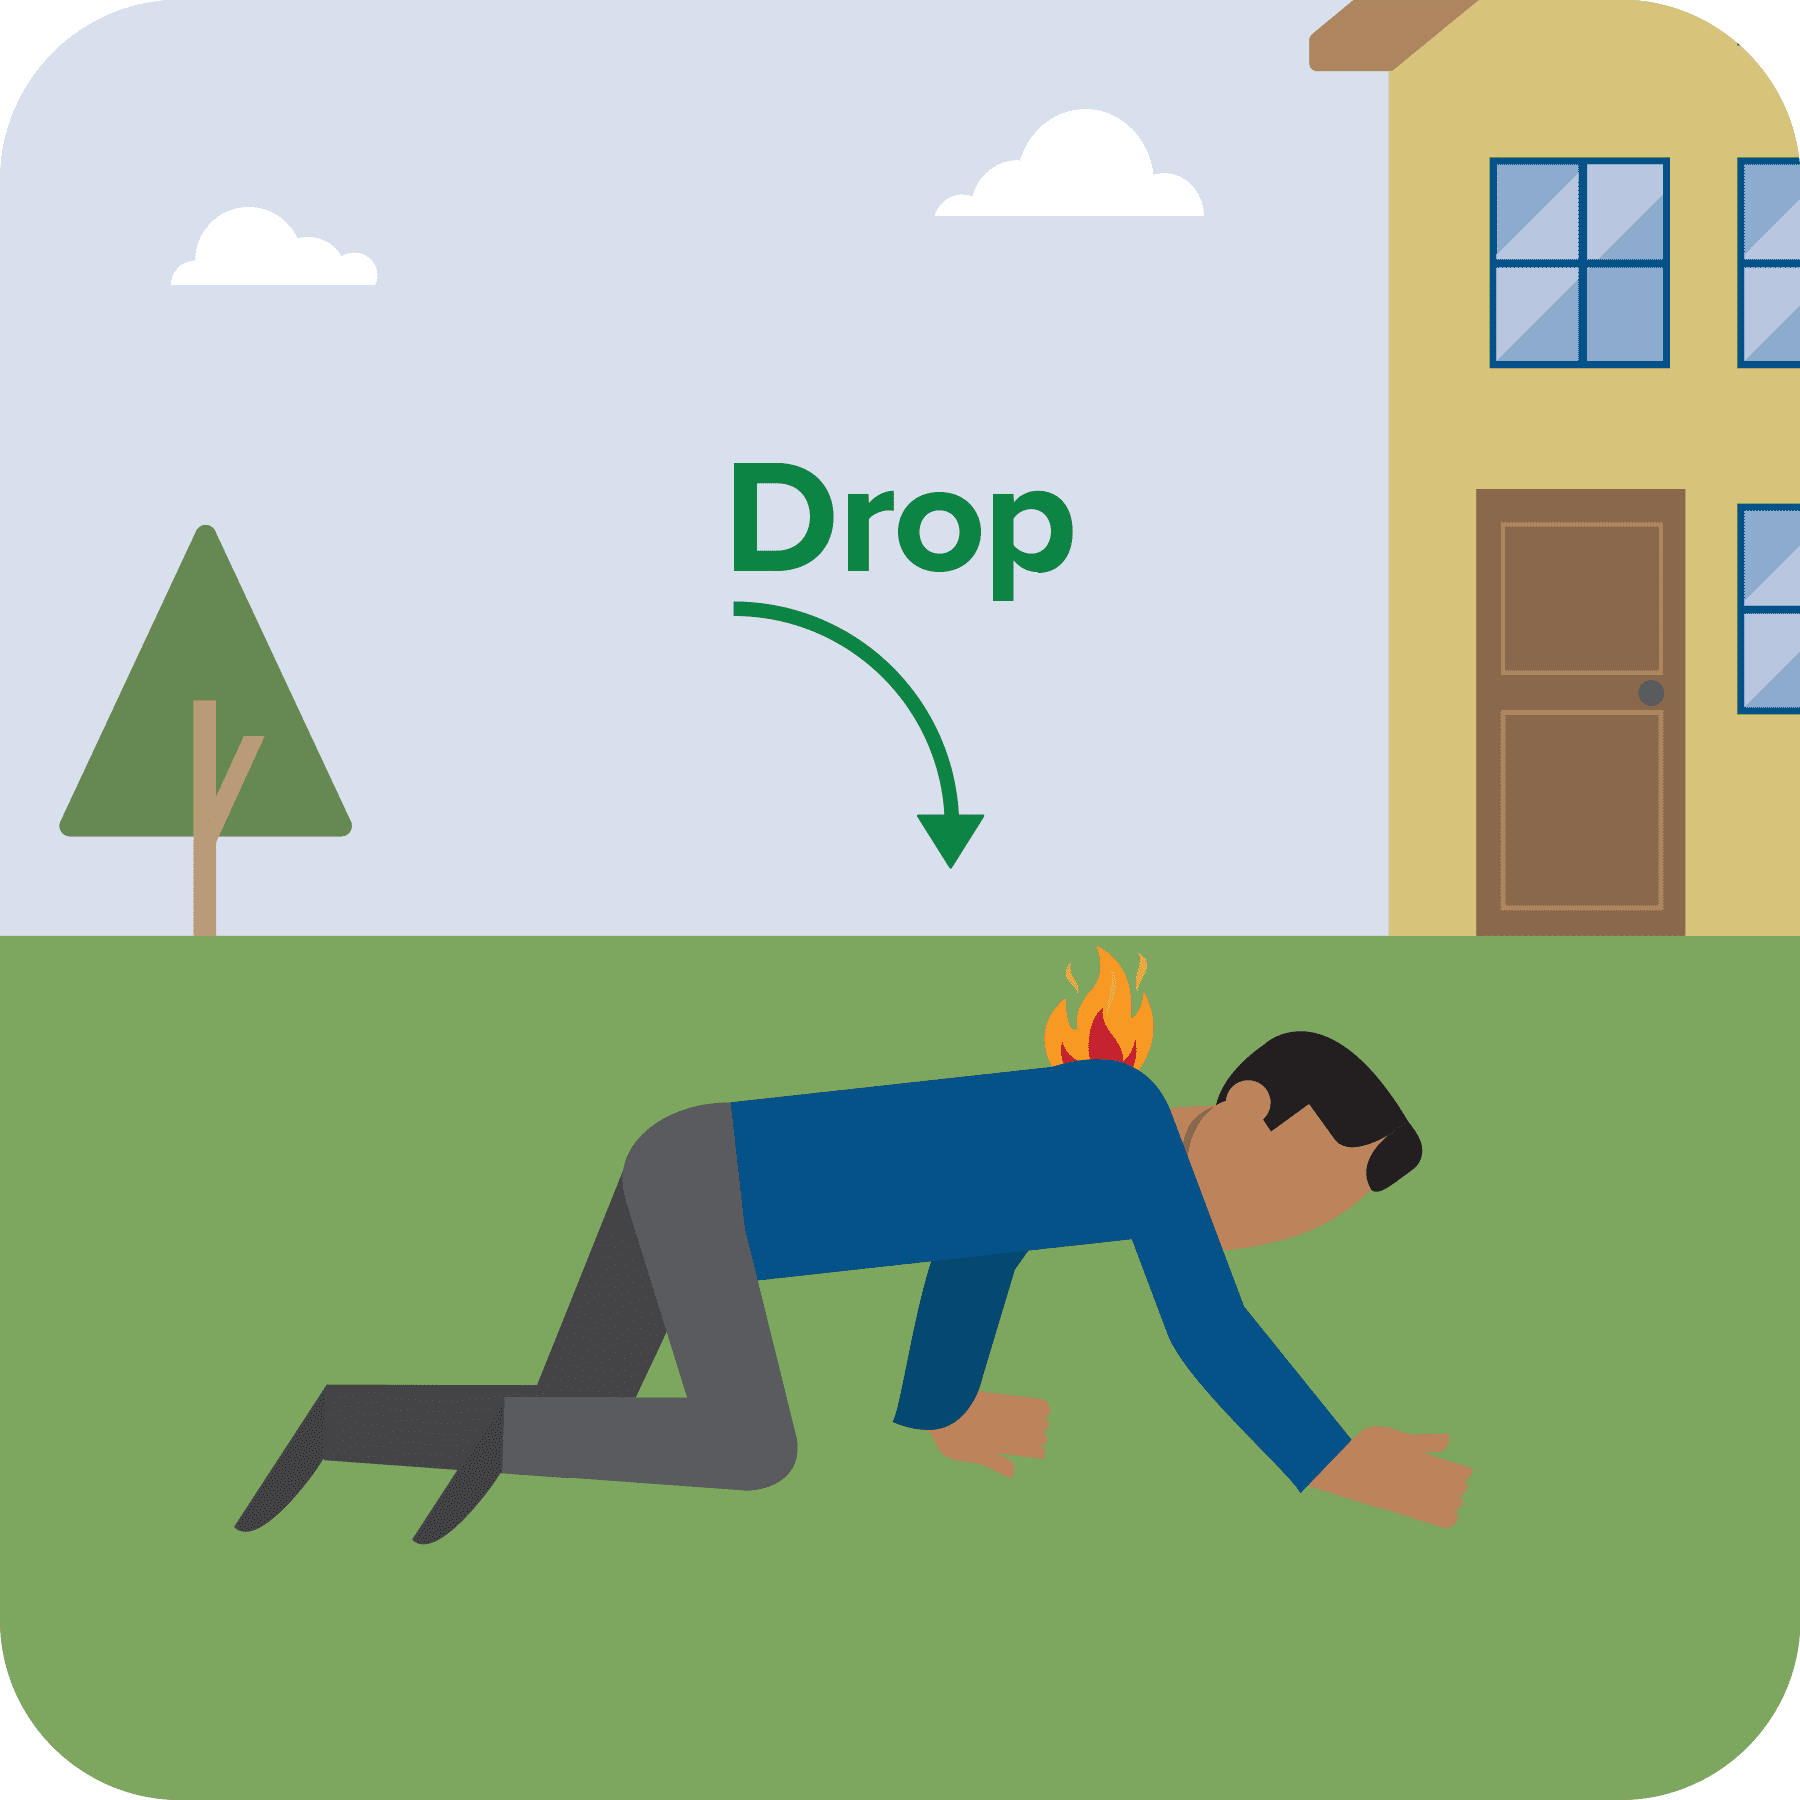 Man drops to the ground. Green drop prompt.